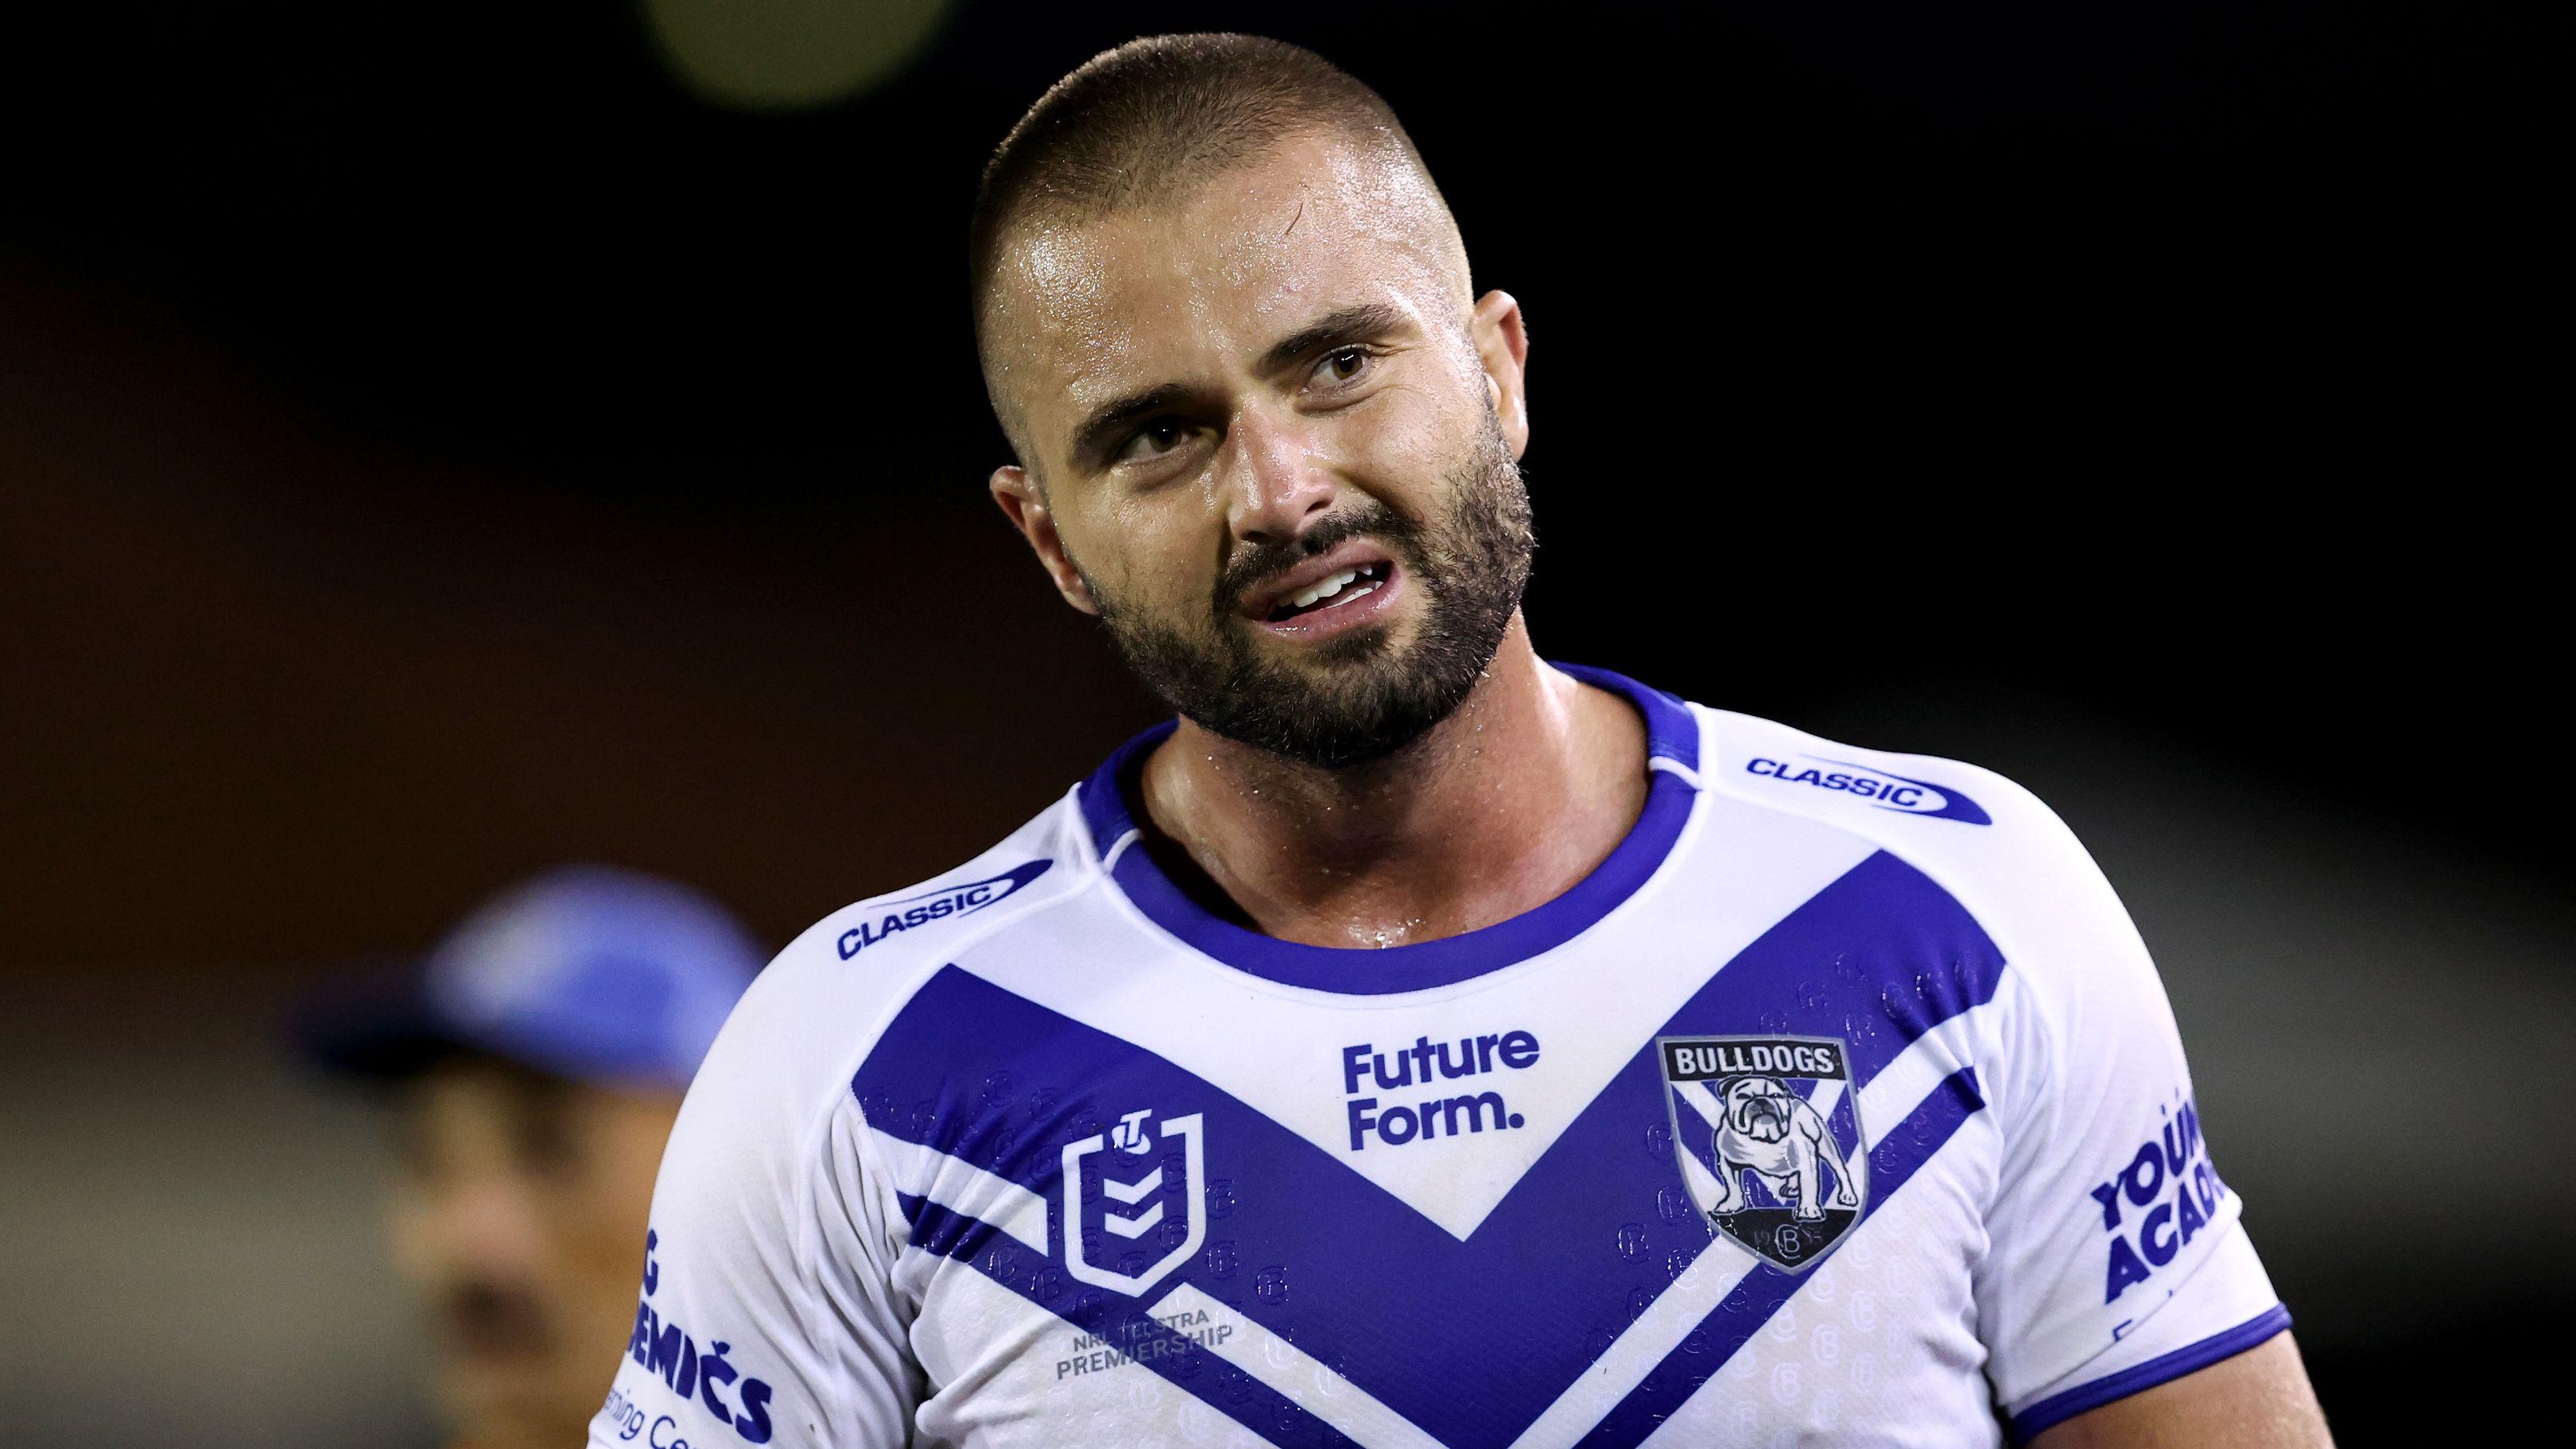 Canberra Raiders vs Canterbury Bulldogs results, round 11, Manly Sea Eagles vs Brisbane Broncos updates, latest news; Bulldogs utility Jaeman Salmon ruled out of Magic Round clash with Raiders after hospital visit